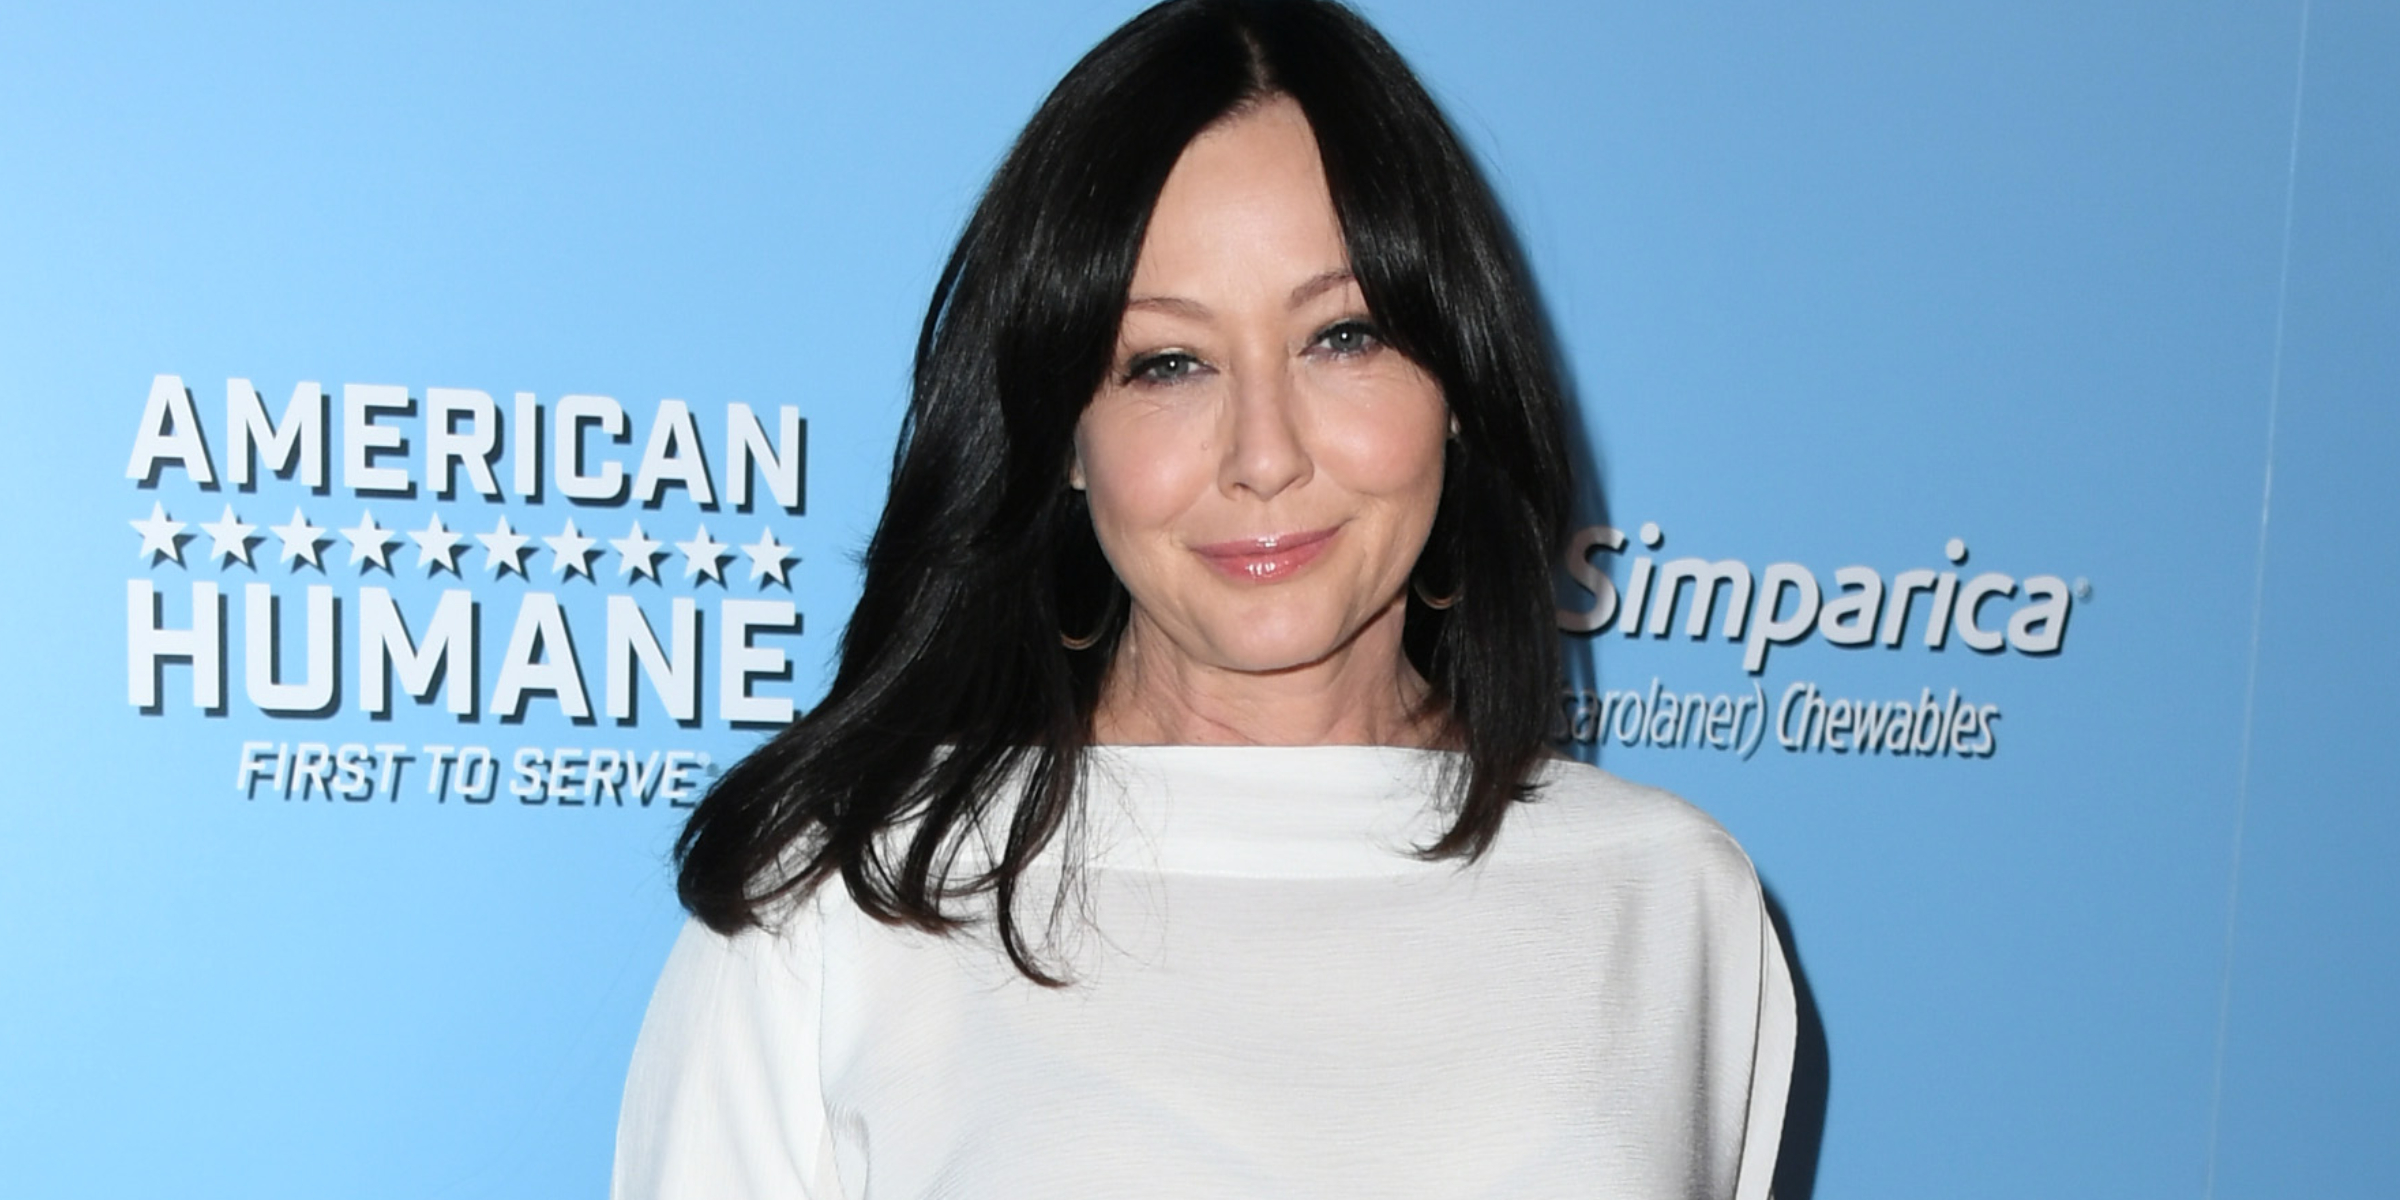 Shannen Doherty | Fuente: Getty Images